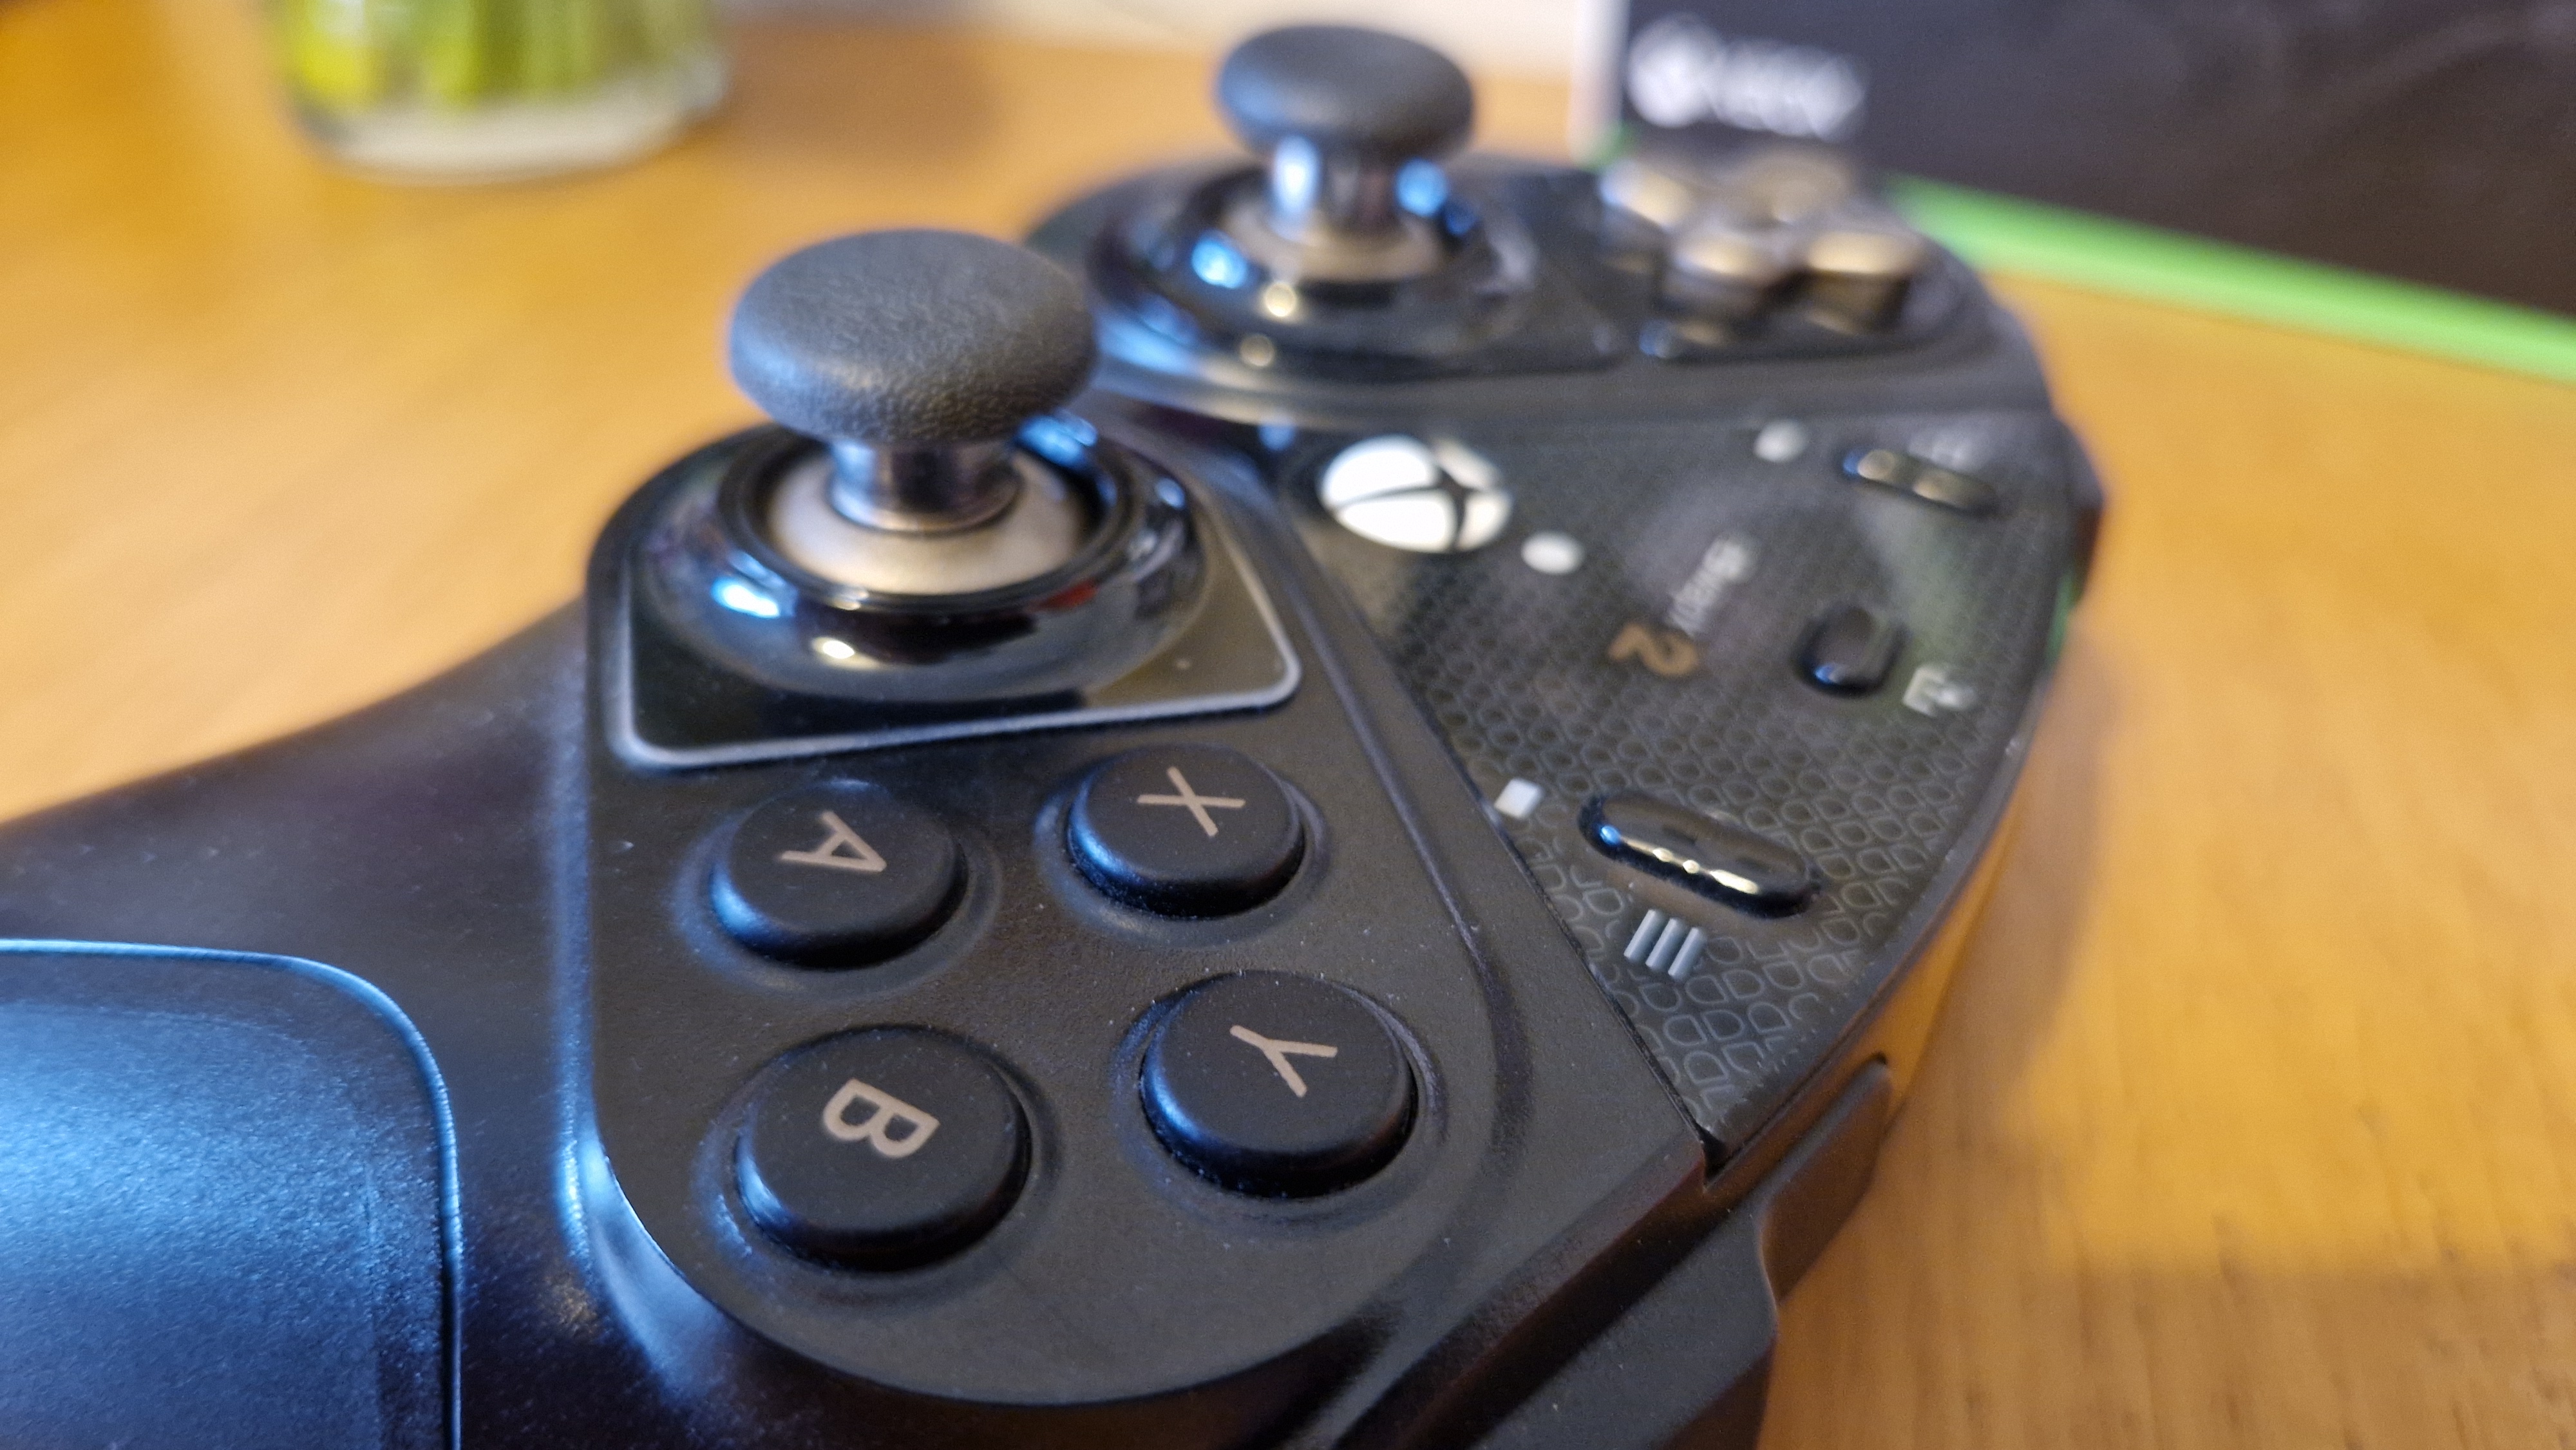 The Thrustmaster eSwap X2 controller on a wooden surface